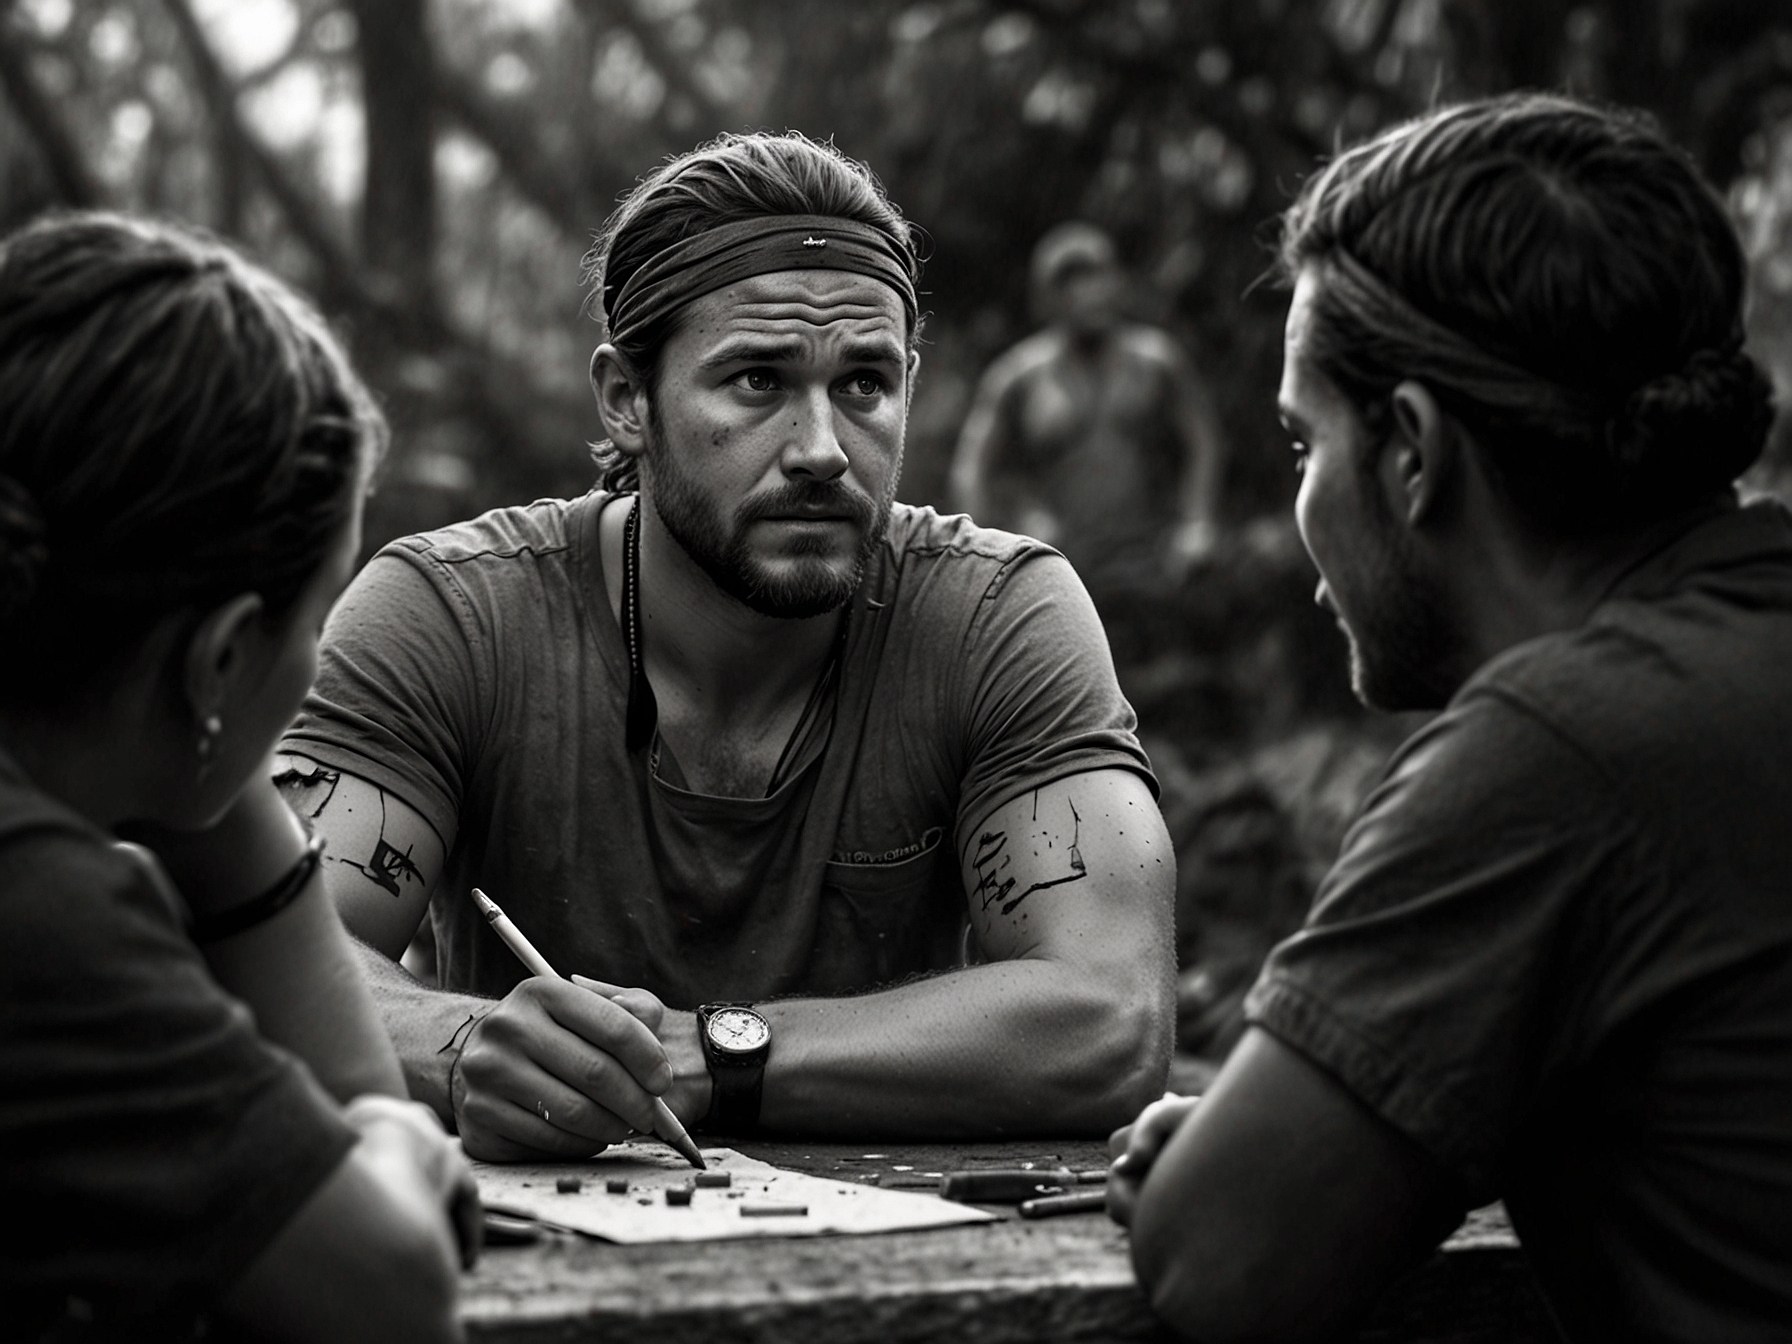 The 'Survivor 45' contestant is shown strategizing during a challenging moment on the reality show, reflecting their cunning and dramatic gameplay that polarized viewers.